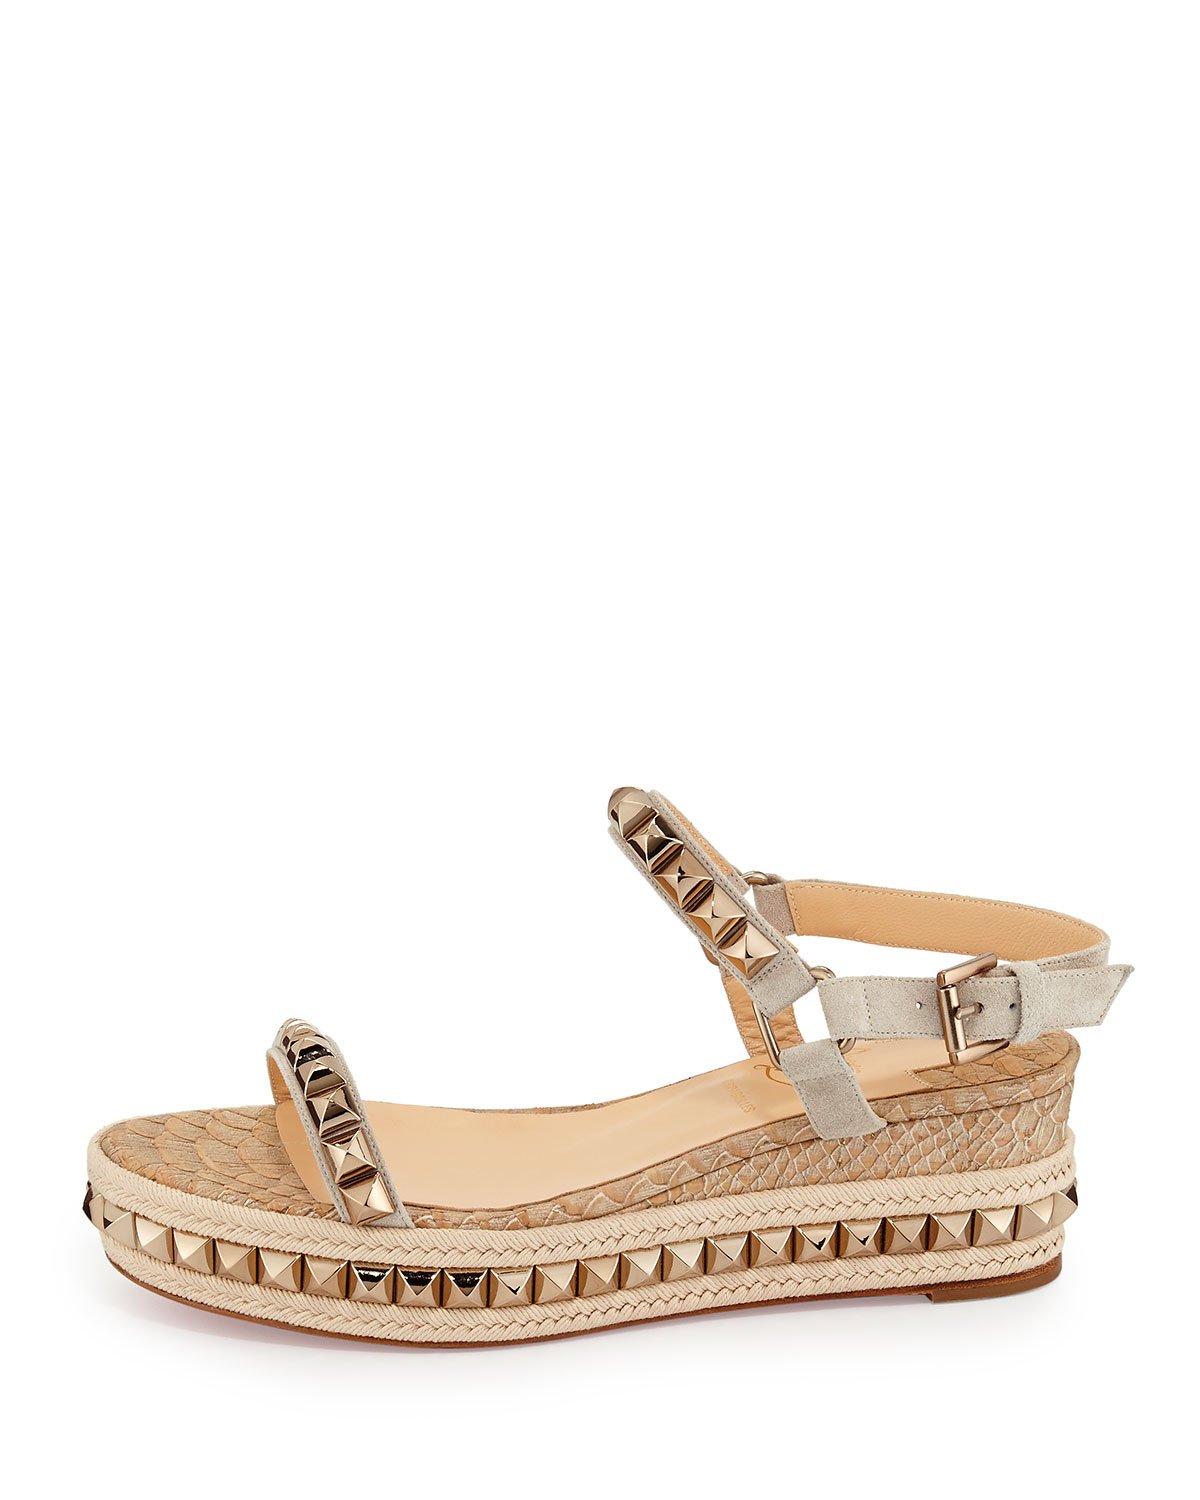 Christian louboutin Cataclou Studded Espadrille Sandals in Beige ...